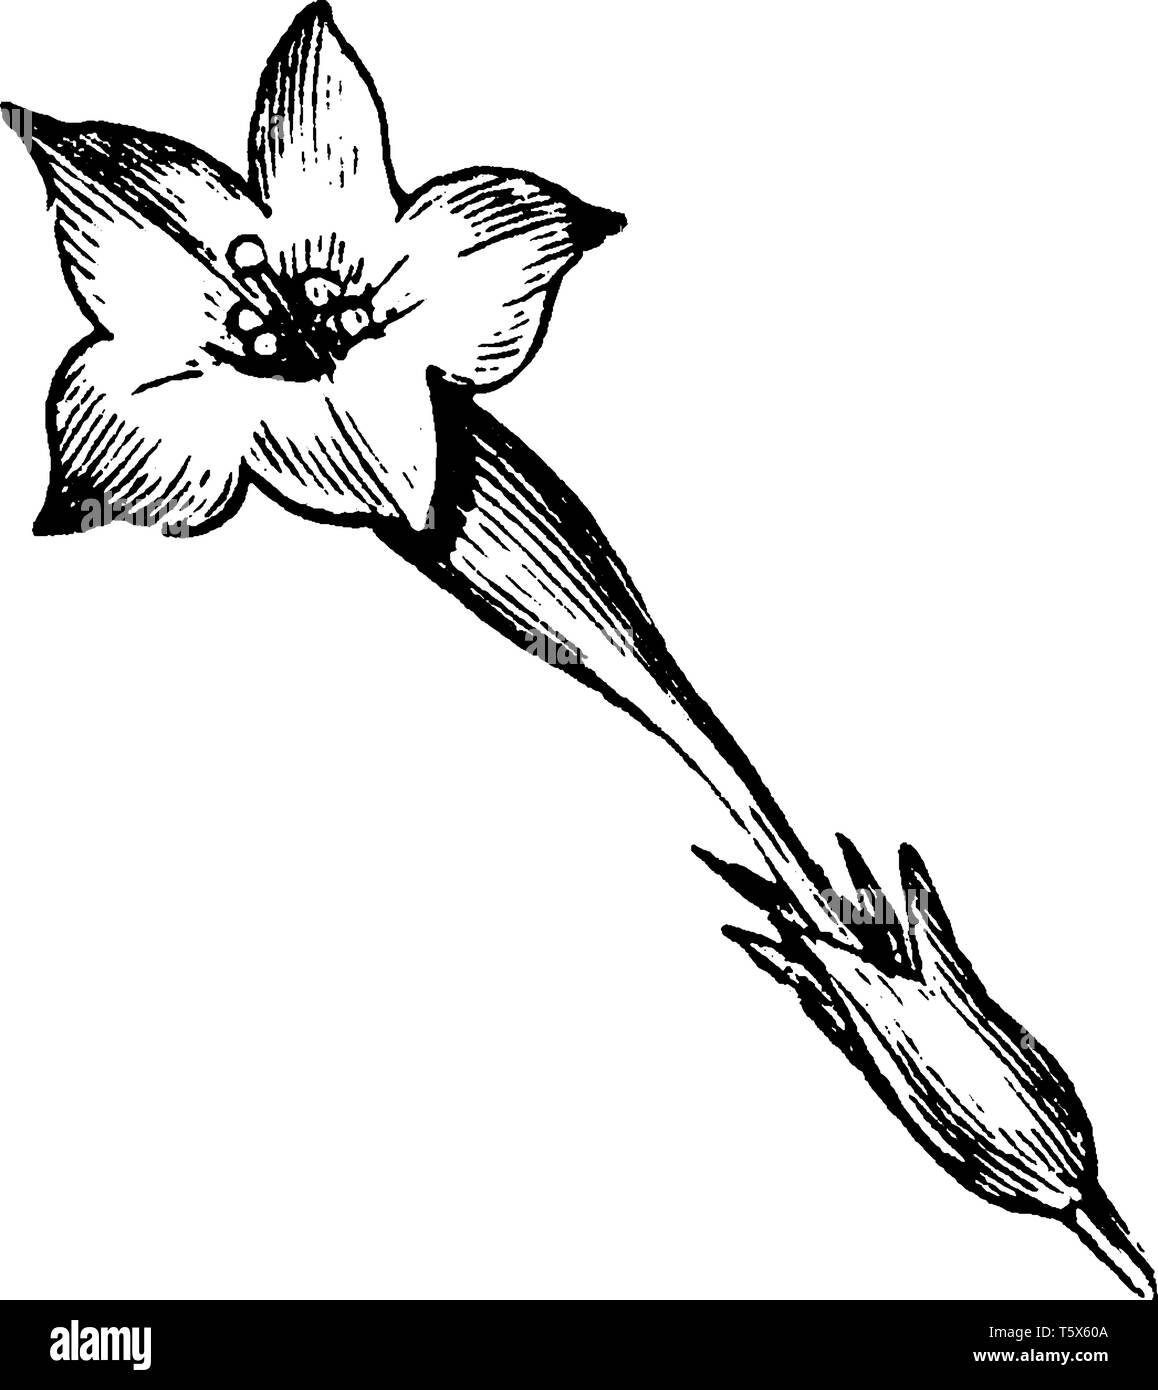 An image of a Funnel-Shaped Corolla flower which is the inner circle of the parts of the flowers, composed of petals, vintage line drawing or engravin Stock Vector